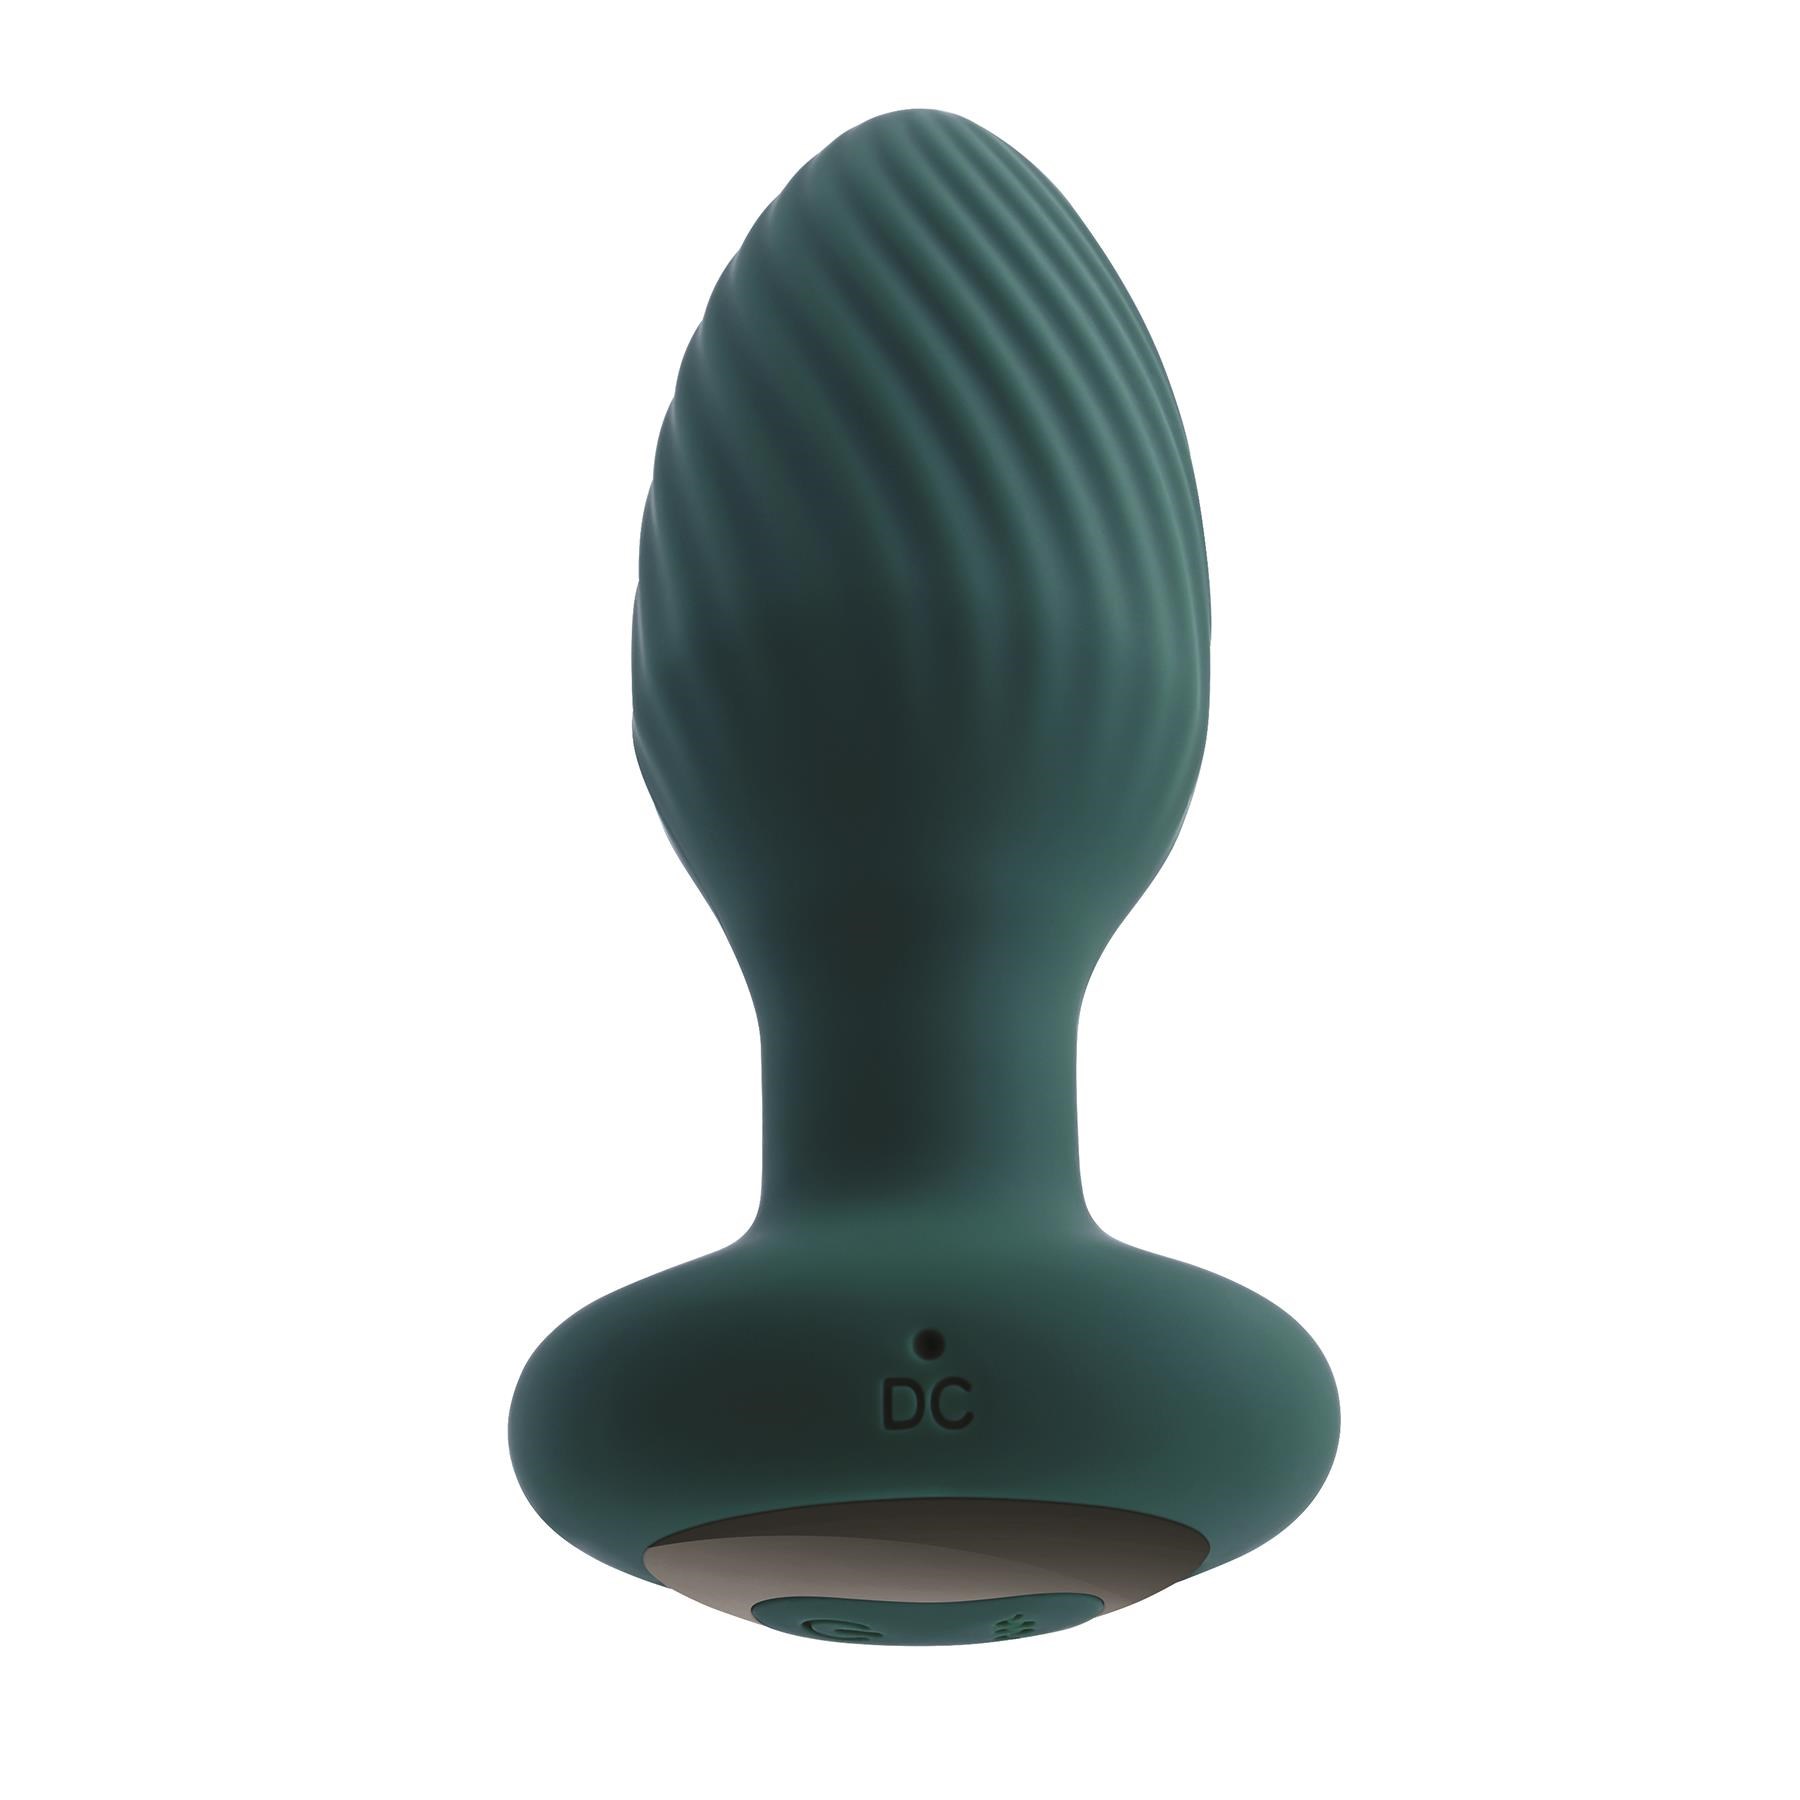 Playboy Pleasure Remote Control Spinning Tail Teaser Butt Plug Product Shot #2